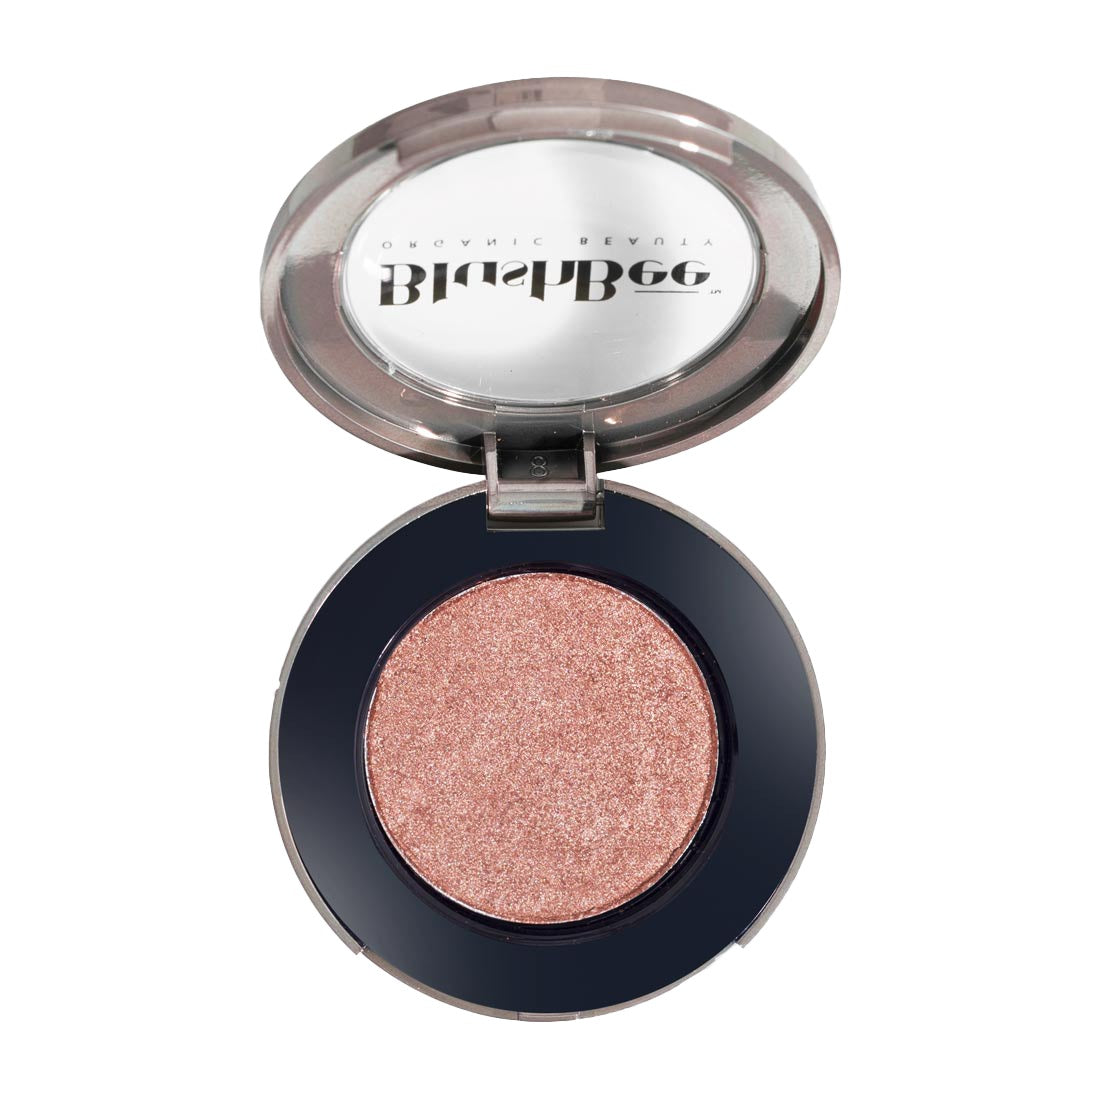 Highlighter - BlushBee Organic Beauty #